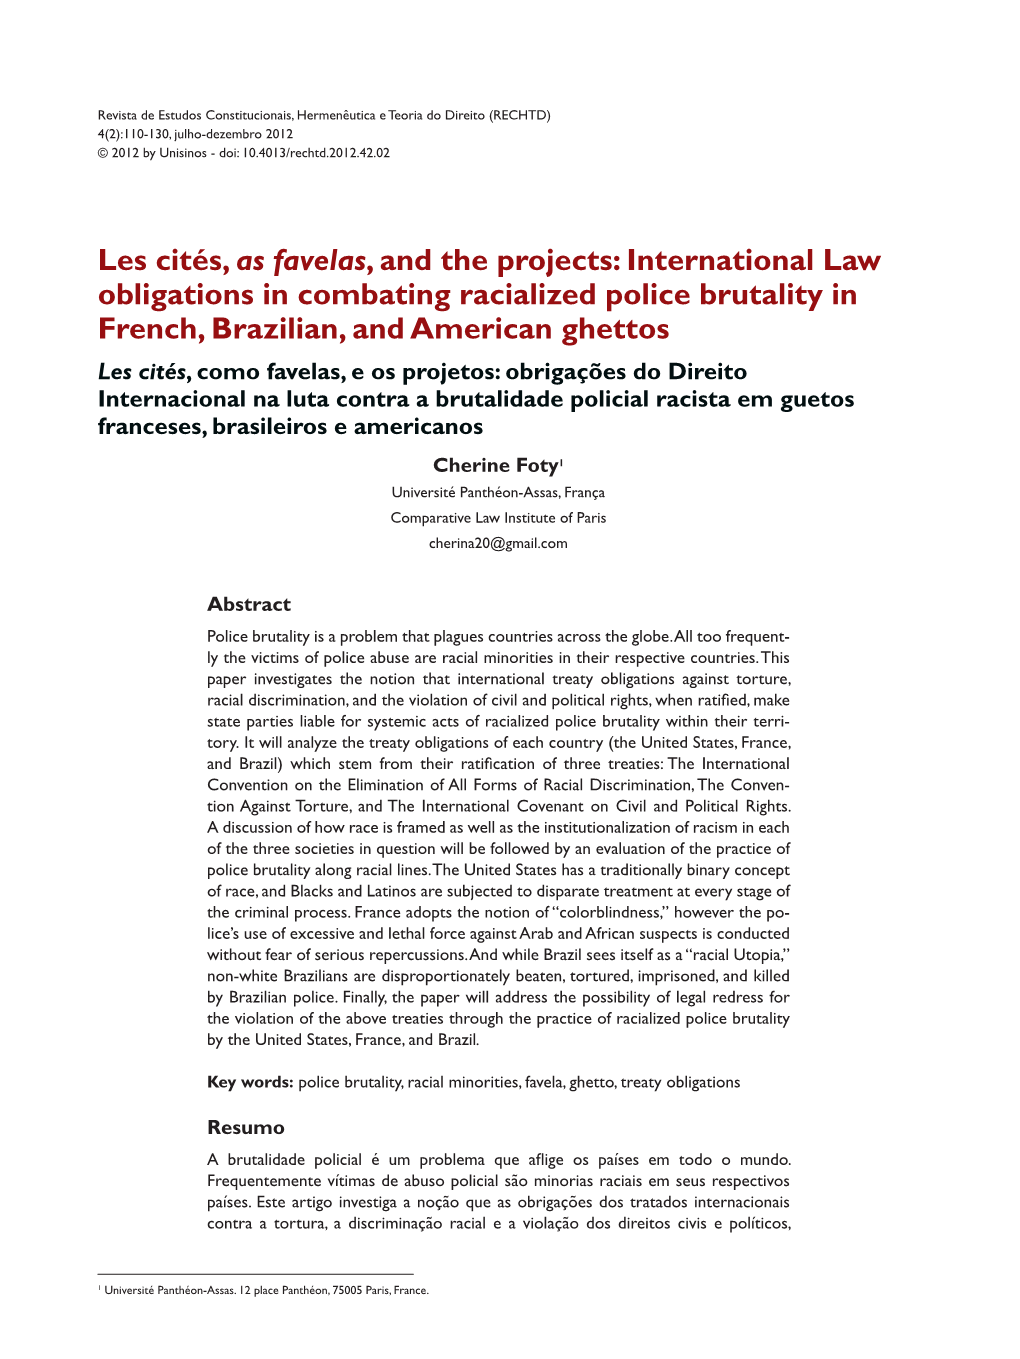 Les Cités, As Favelas, and the Projects: International Law Obligations in Combating Racialized Police Brutality in French, Braz